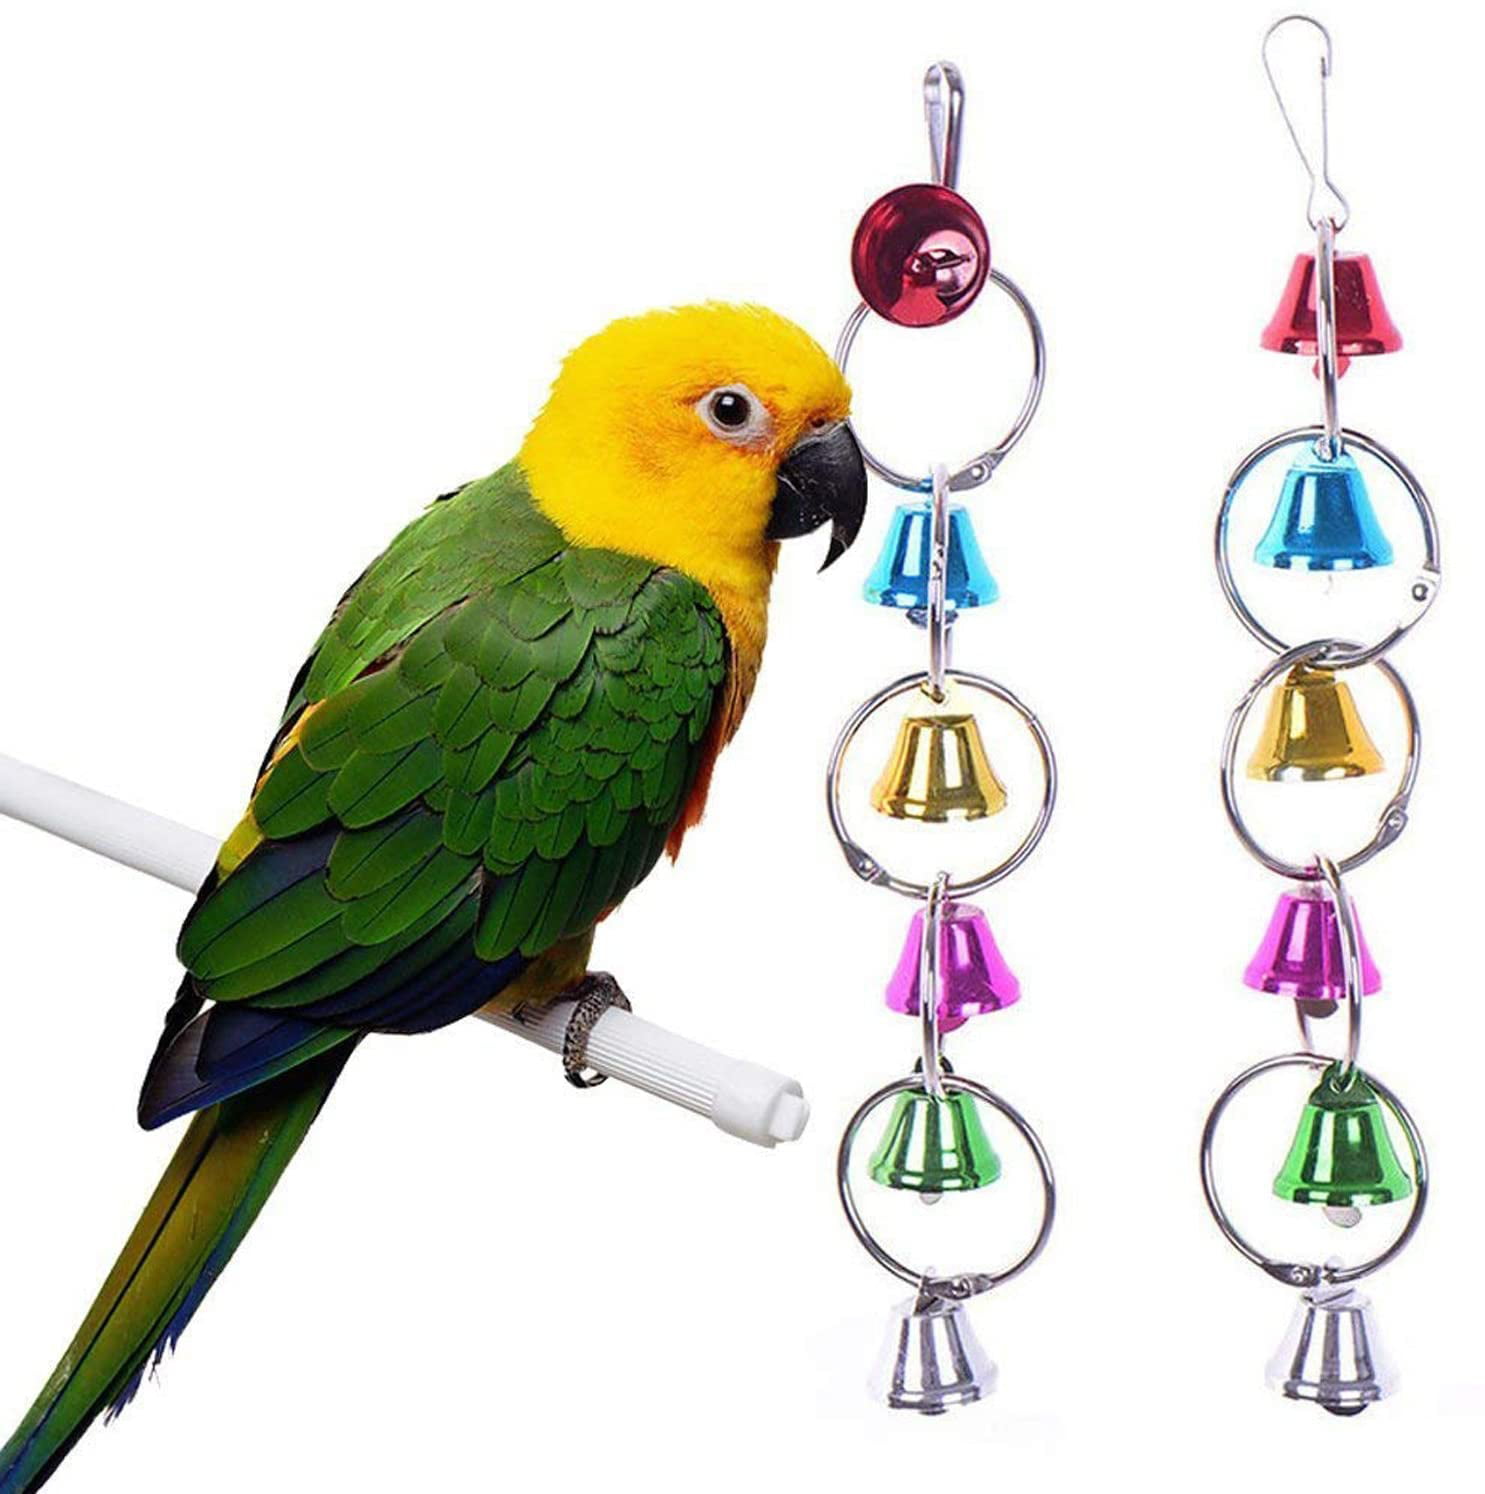 E-KOMG 13 Packs Bird Swing Toys,Parrot Chewing Hanging Perches with Bell,Pet Birds Cage Toys Suitable for Small Parakeets,Conures,Love Birds,Cockatiels,Macaws,Finches 